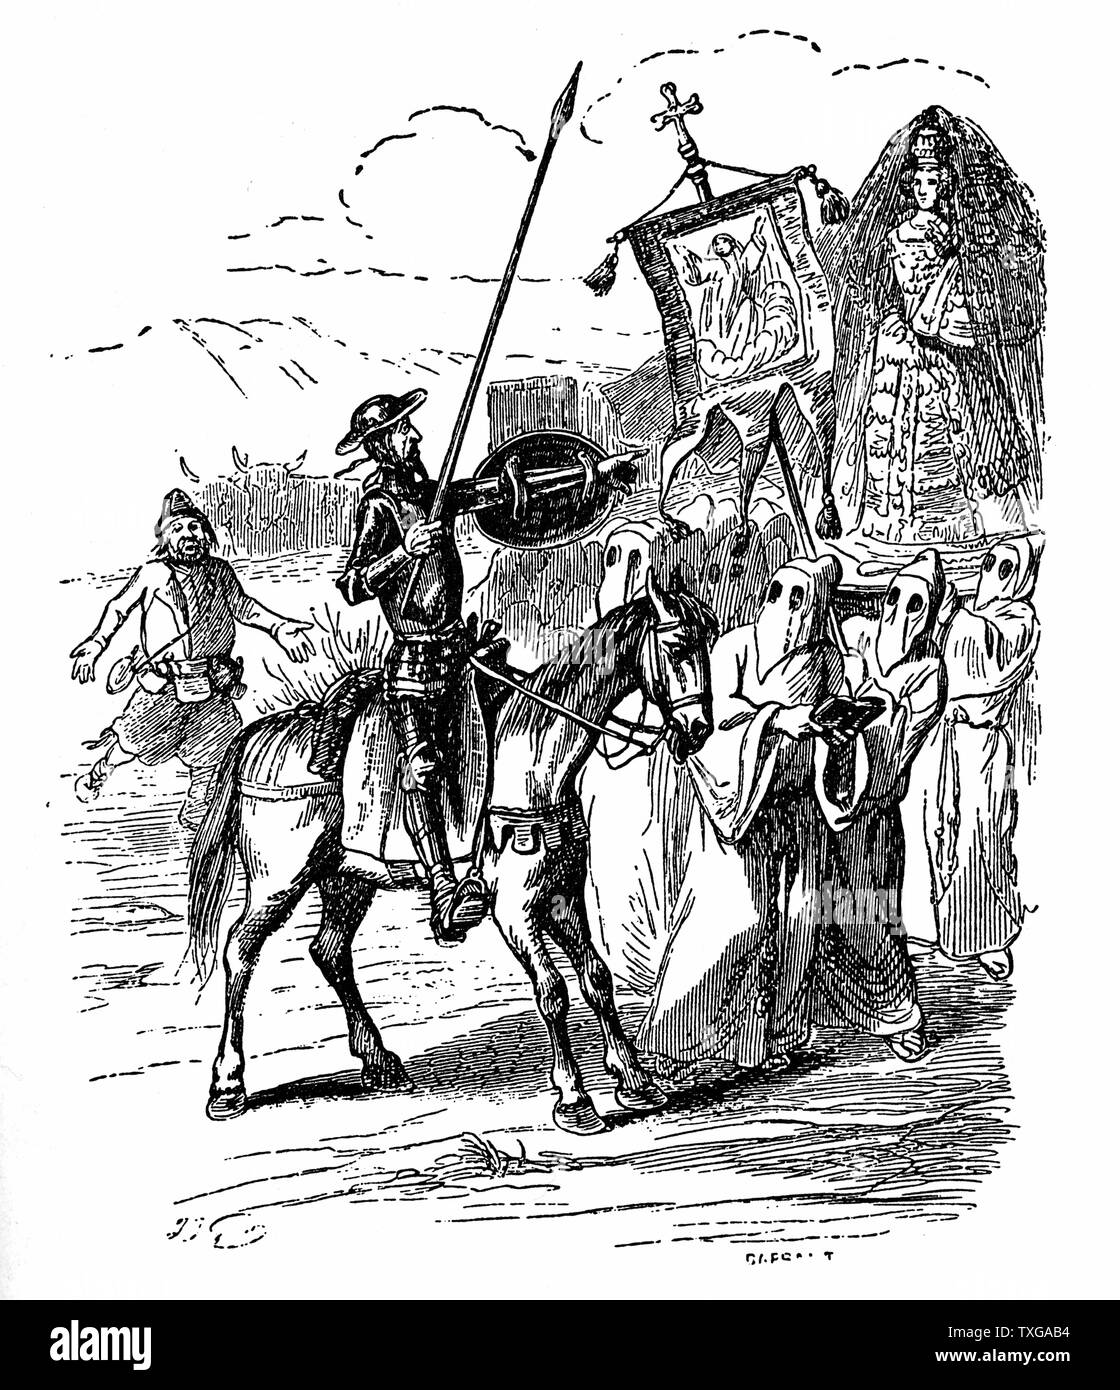 Miguel de Cervantes, Spanish novelist, poet, and playwright. His magnum opus Don Quixote  is considered the first modern novel. Illustration shows the knight-errant Don Quixote de la Mancha. The procession of penitents Stock Photo